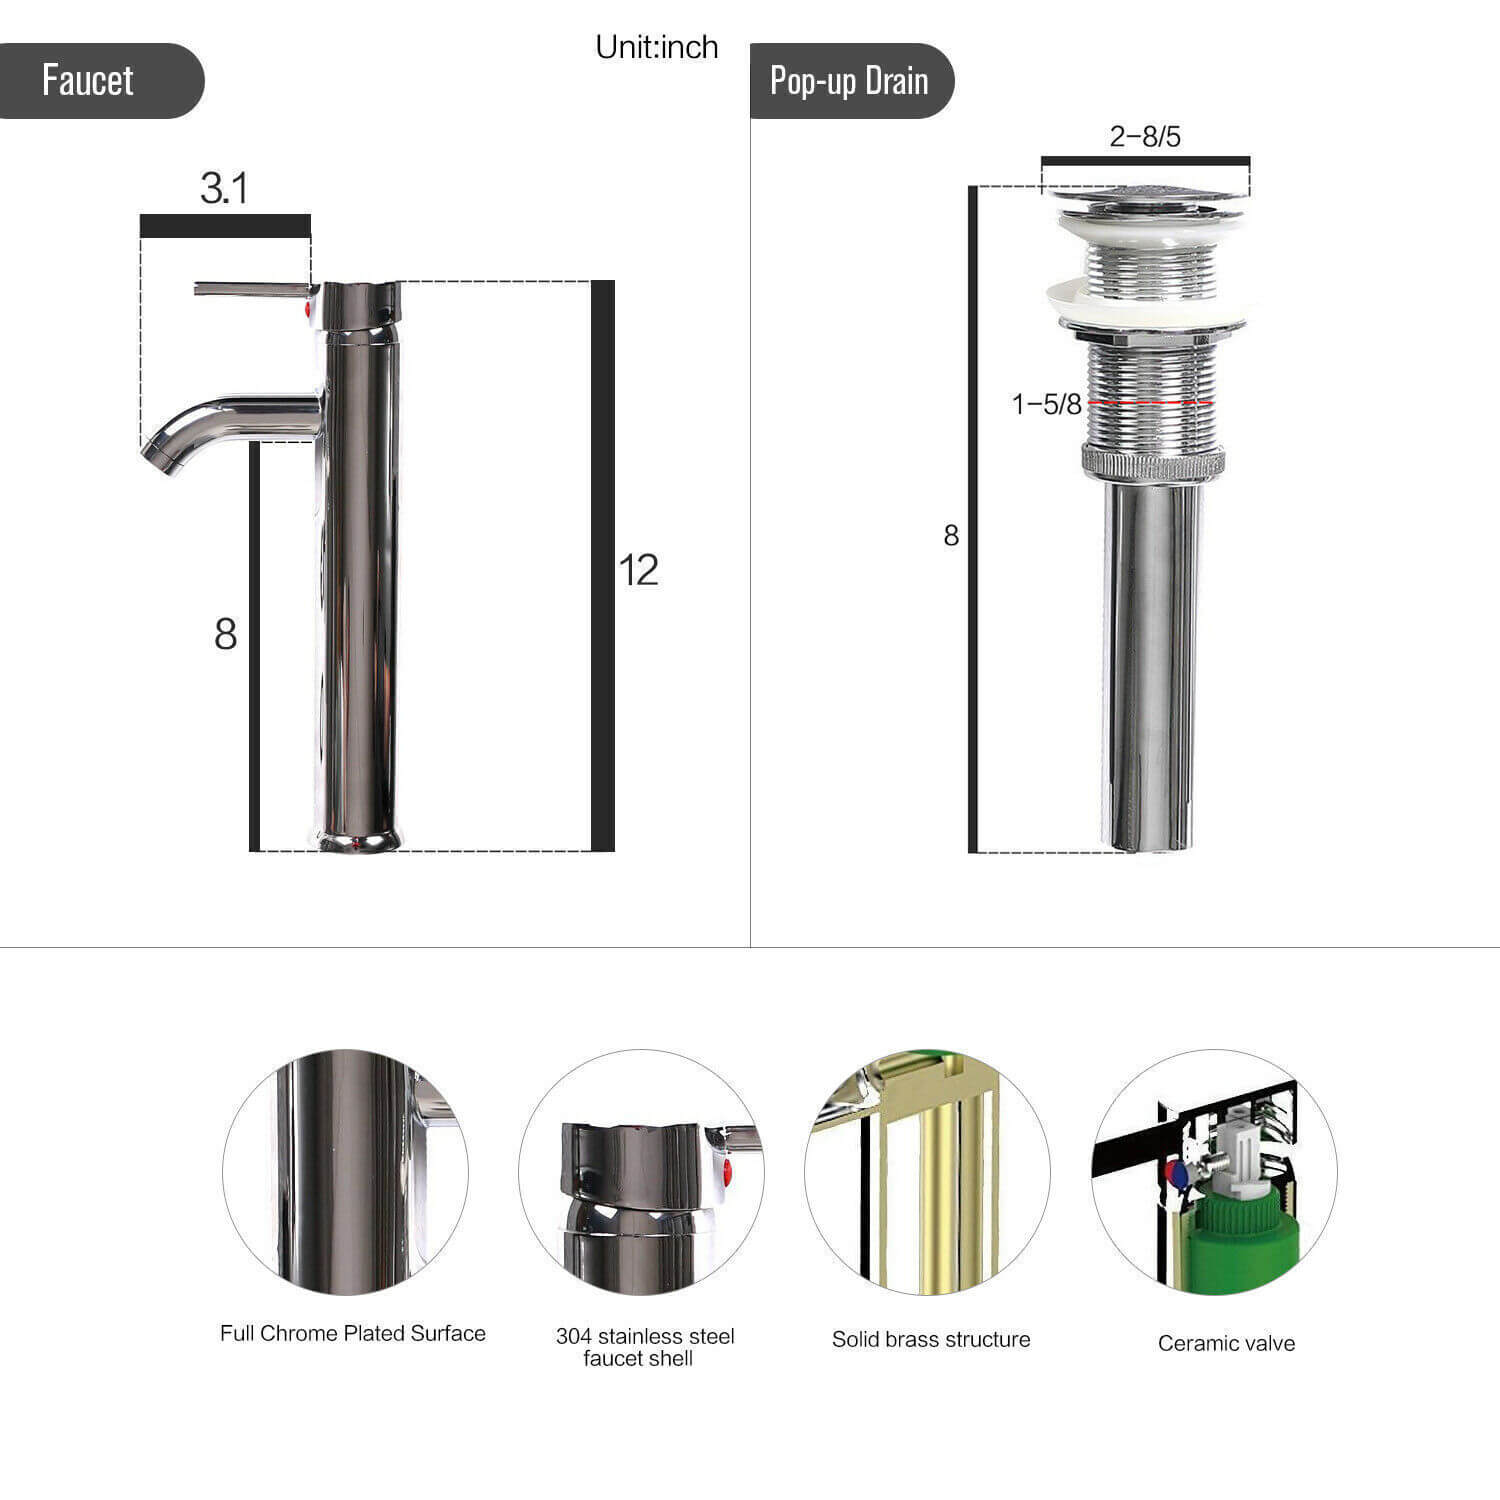 Elecwish sink faucet and pop-up drain size and features